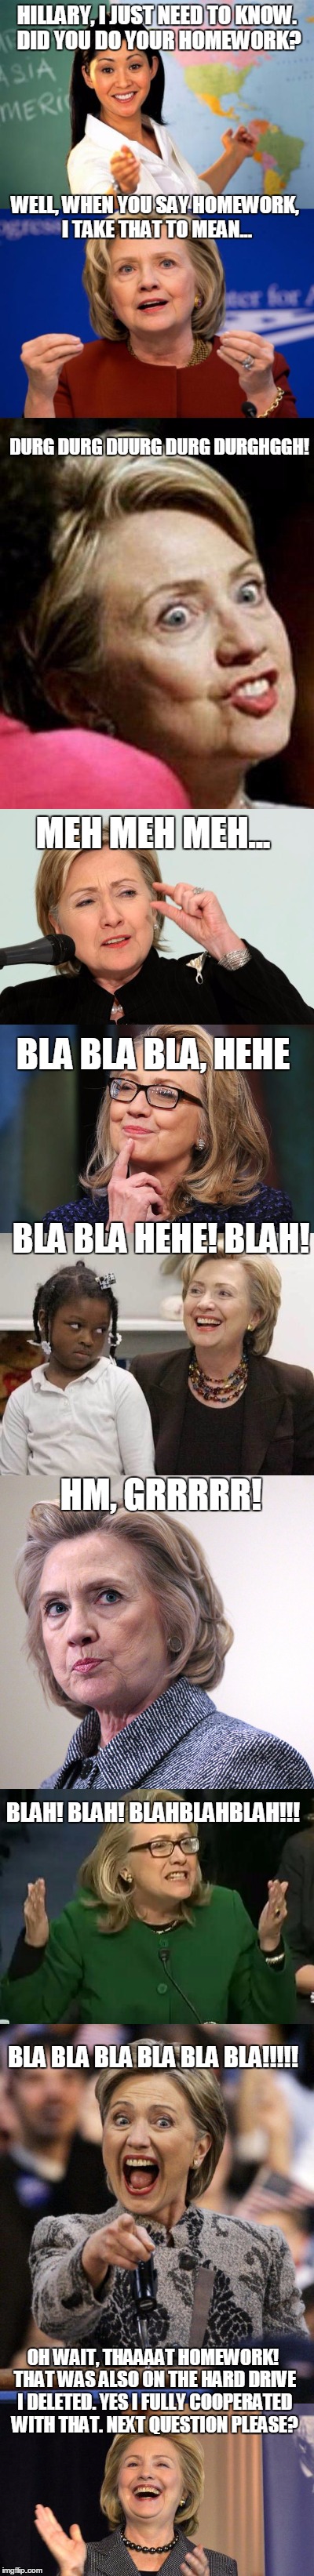 A simple question | HILLARY, I JUST NEED TO KNOW. DID YOU DO YOUR HOMEWORK? WELL, WHEN YOU SAY HOMEWORK, I TAKE THAT TO MEAN... DURG DURG DUURG DURG DURGHGGH! MEH MEH MEH... BLA BLA BLA, HEHE; BLA BLA HEHE! BLAH! HM, GRRRRR! BLAH! BLAH! BLAHBLAHBLAH!!! BLA BLA BLA BLA BLA BLA!!!!! OH WAIT, THAAAAT HOMEWORK! THAT WAS ALSO ON THE HARD DRIVE I DELETED. YES I FULLY COOPERATED WITH THAT. NEXT QUESTION PLEASE? | image tagged in hillary clinton | made w/ Imgflip meme maker